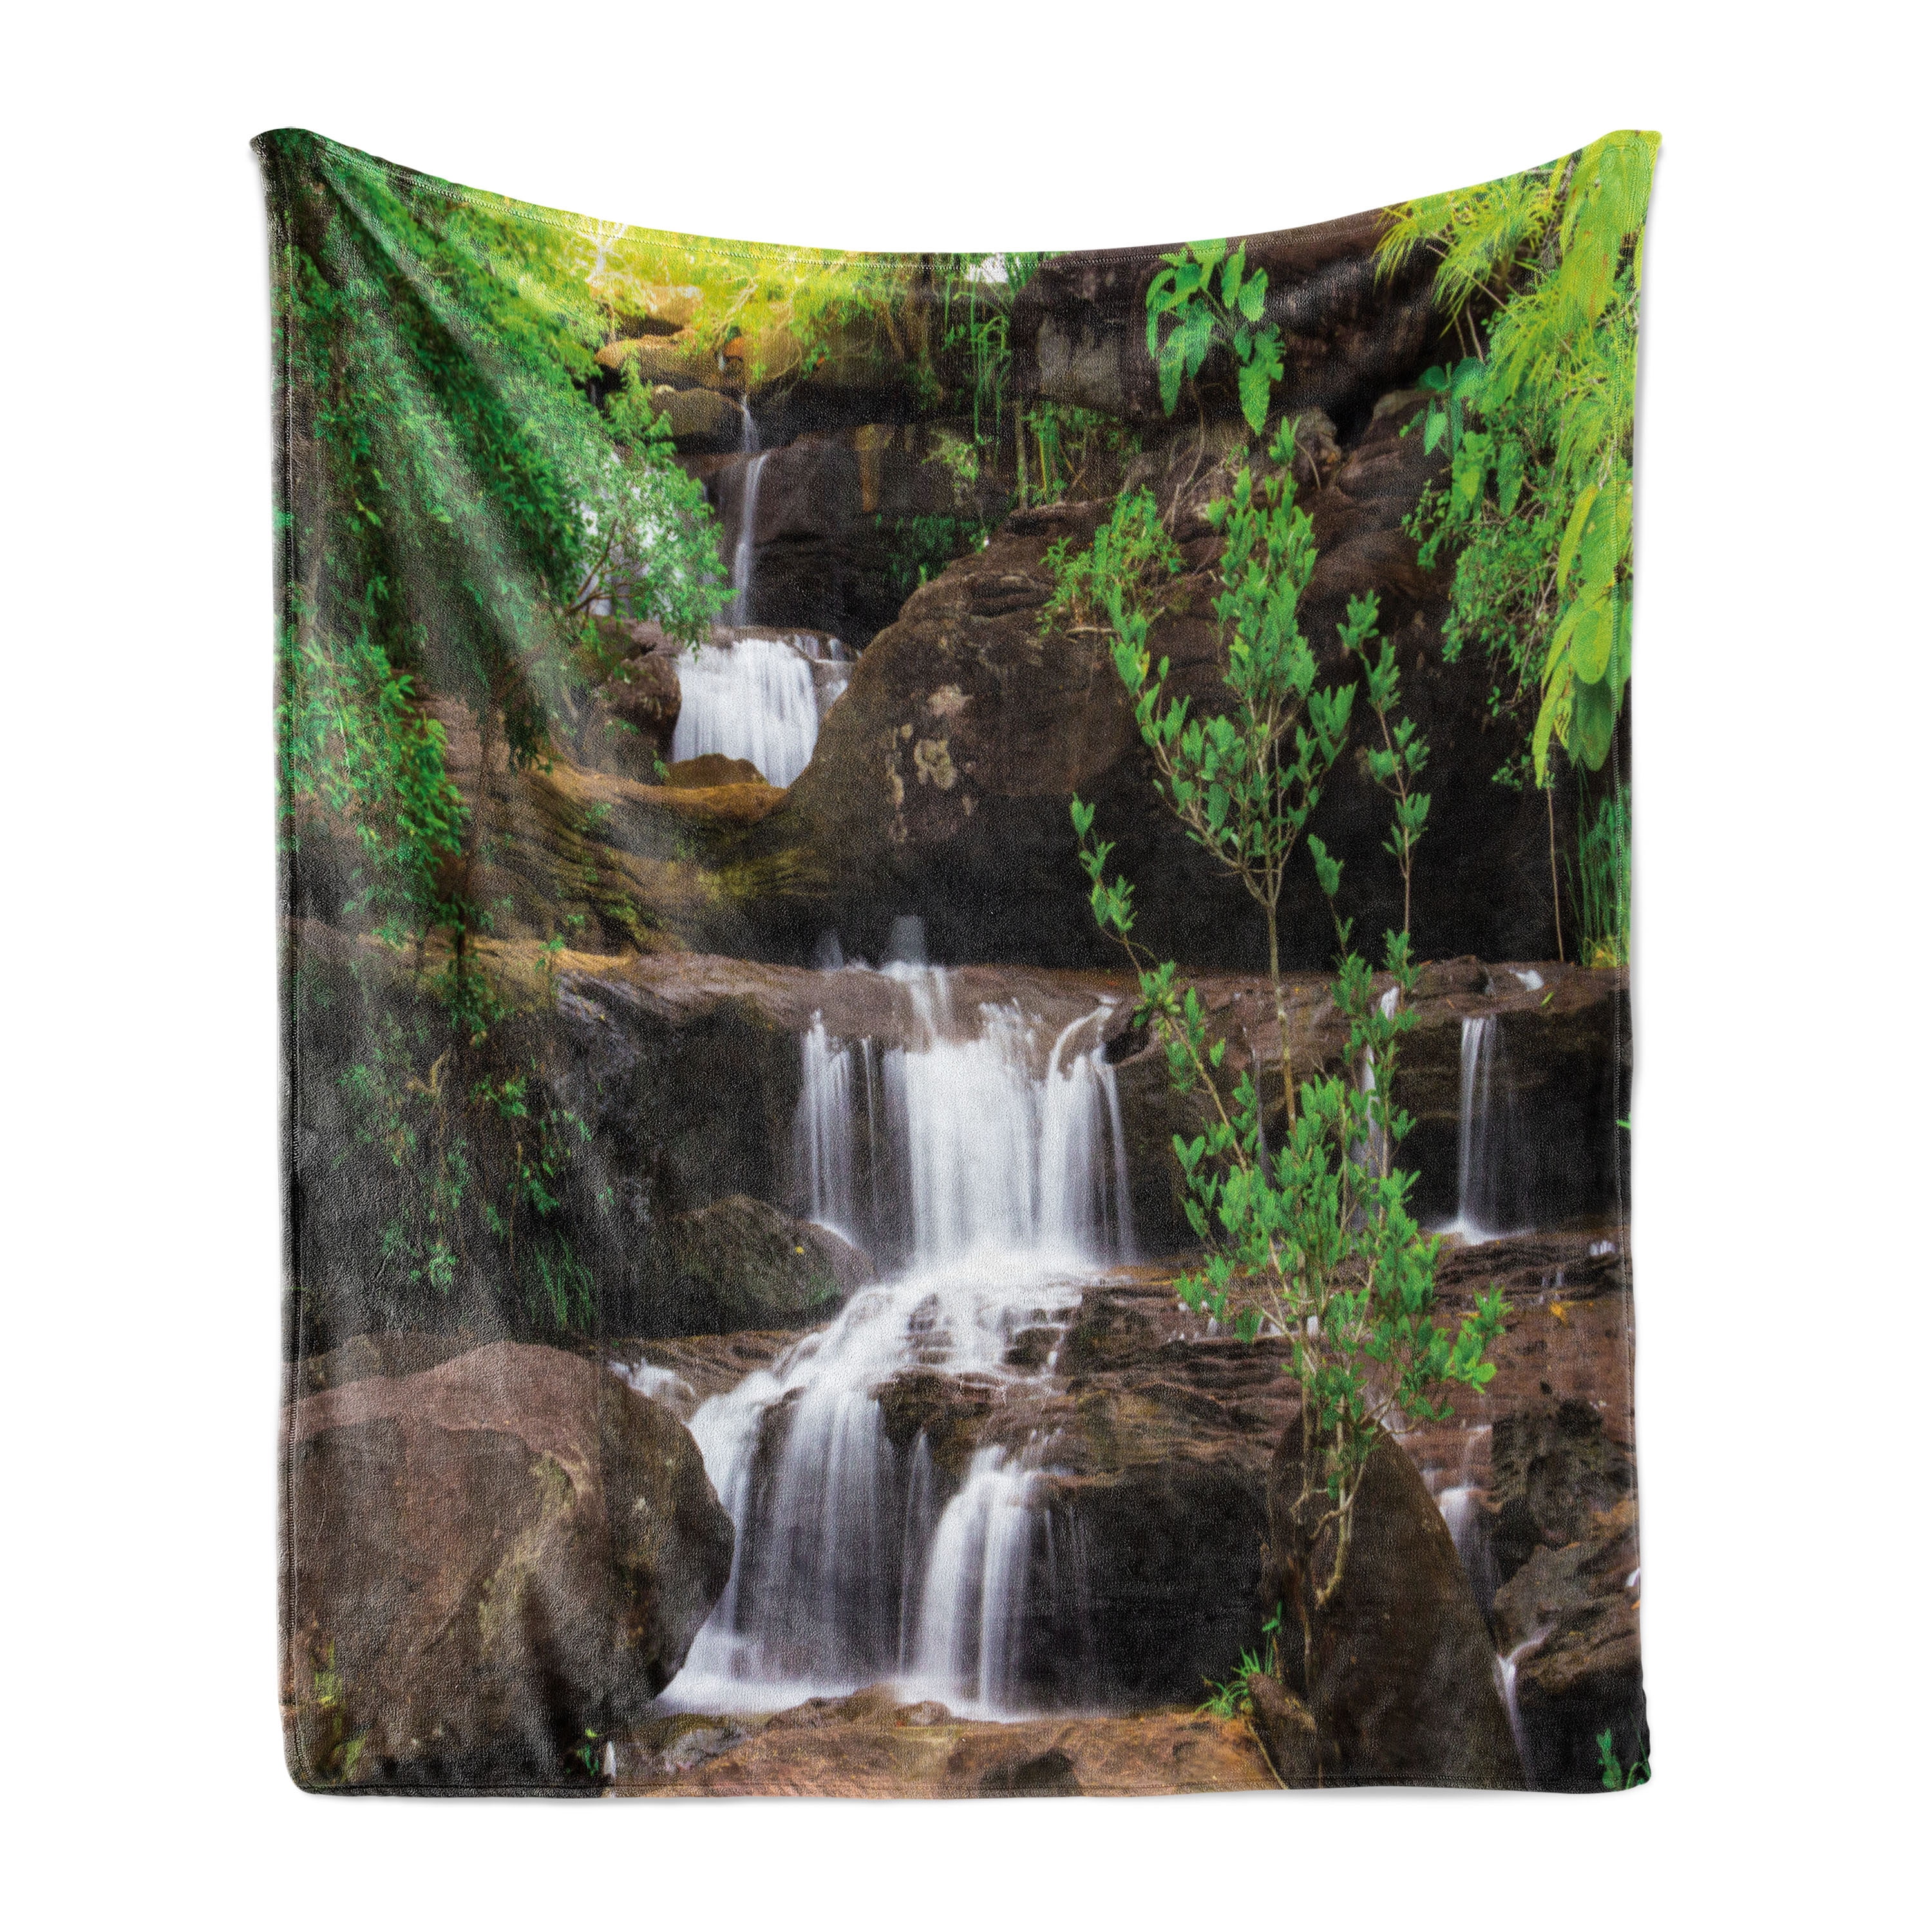 Waterfall Soft Flannel Fleece Blanket, Little Waterfalls Flow on Rock  Stairs Surrounded by Long Plants Earth, Cozy Plush for Indoor and Outdoor  Use, 50 x 60, Brown White and Green, by Ambesonne 